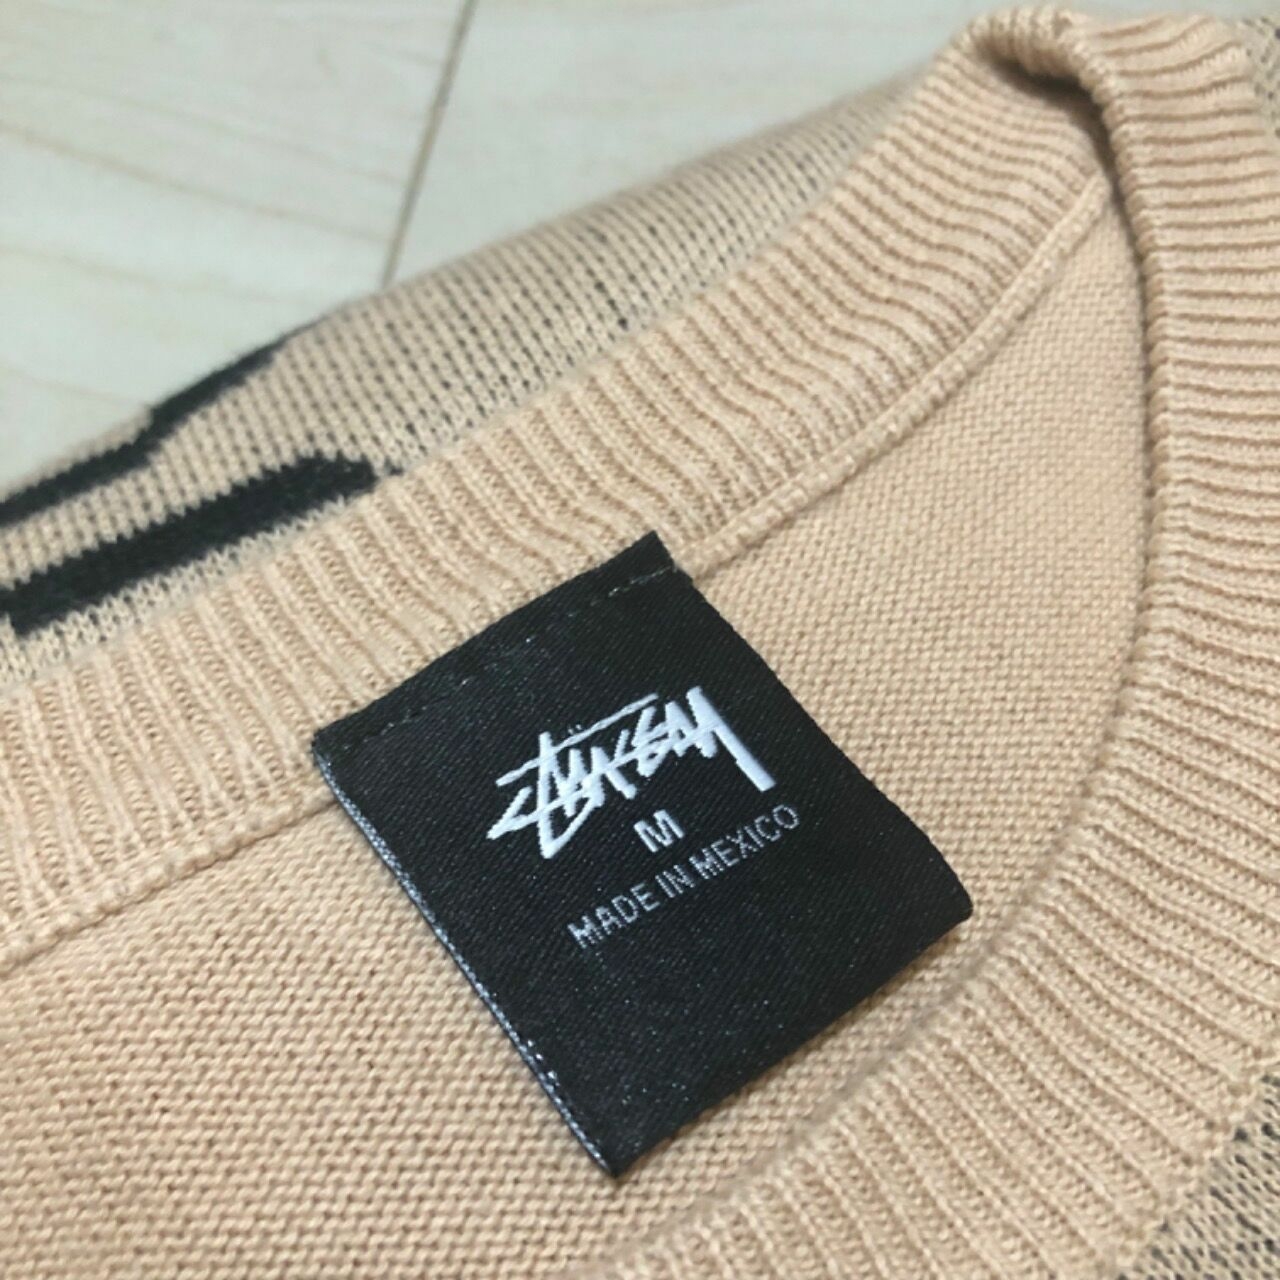 Stussy Aesthetic Knit Sweater